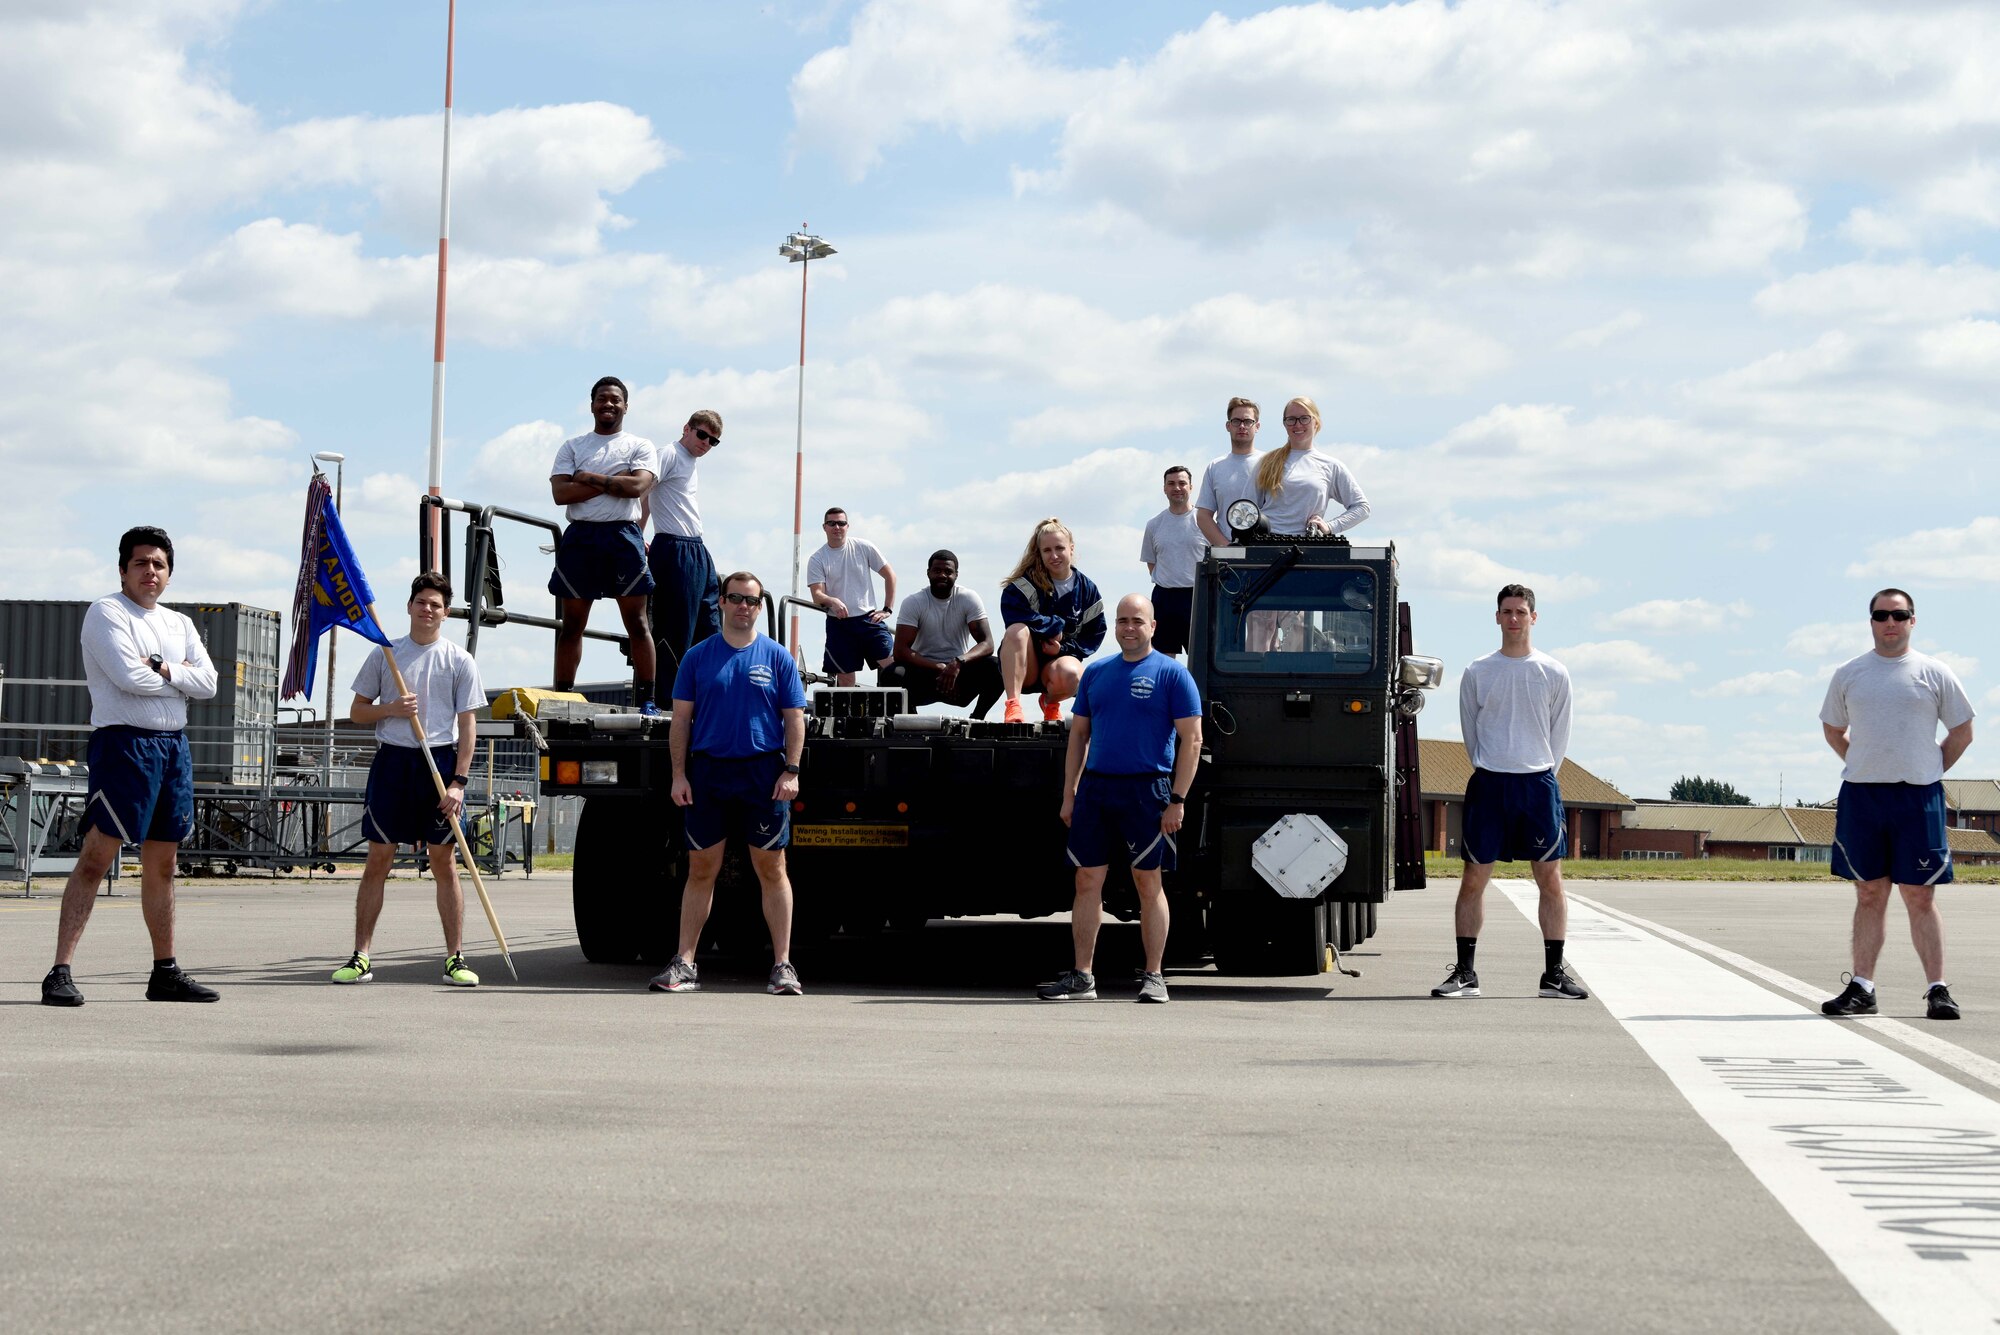 Airmen from the 727th Air Mobility Squadron pose for a photo prior to the Port Dawg Memorial Run at RAF Mildenhall, England, May 15, 2020. Air transportation community members, commonly referred to as “Port Dawgs,” are responsible for military logistics-related aerial ports across the Air Force. (U.S. Air Force photo by Senior Airman Brandon Esau)